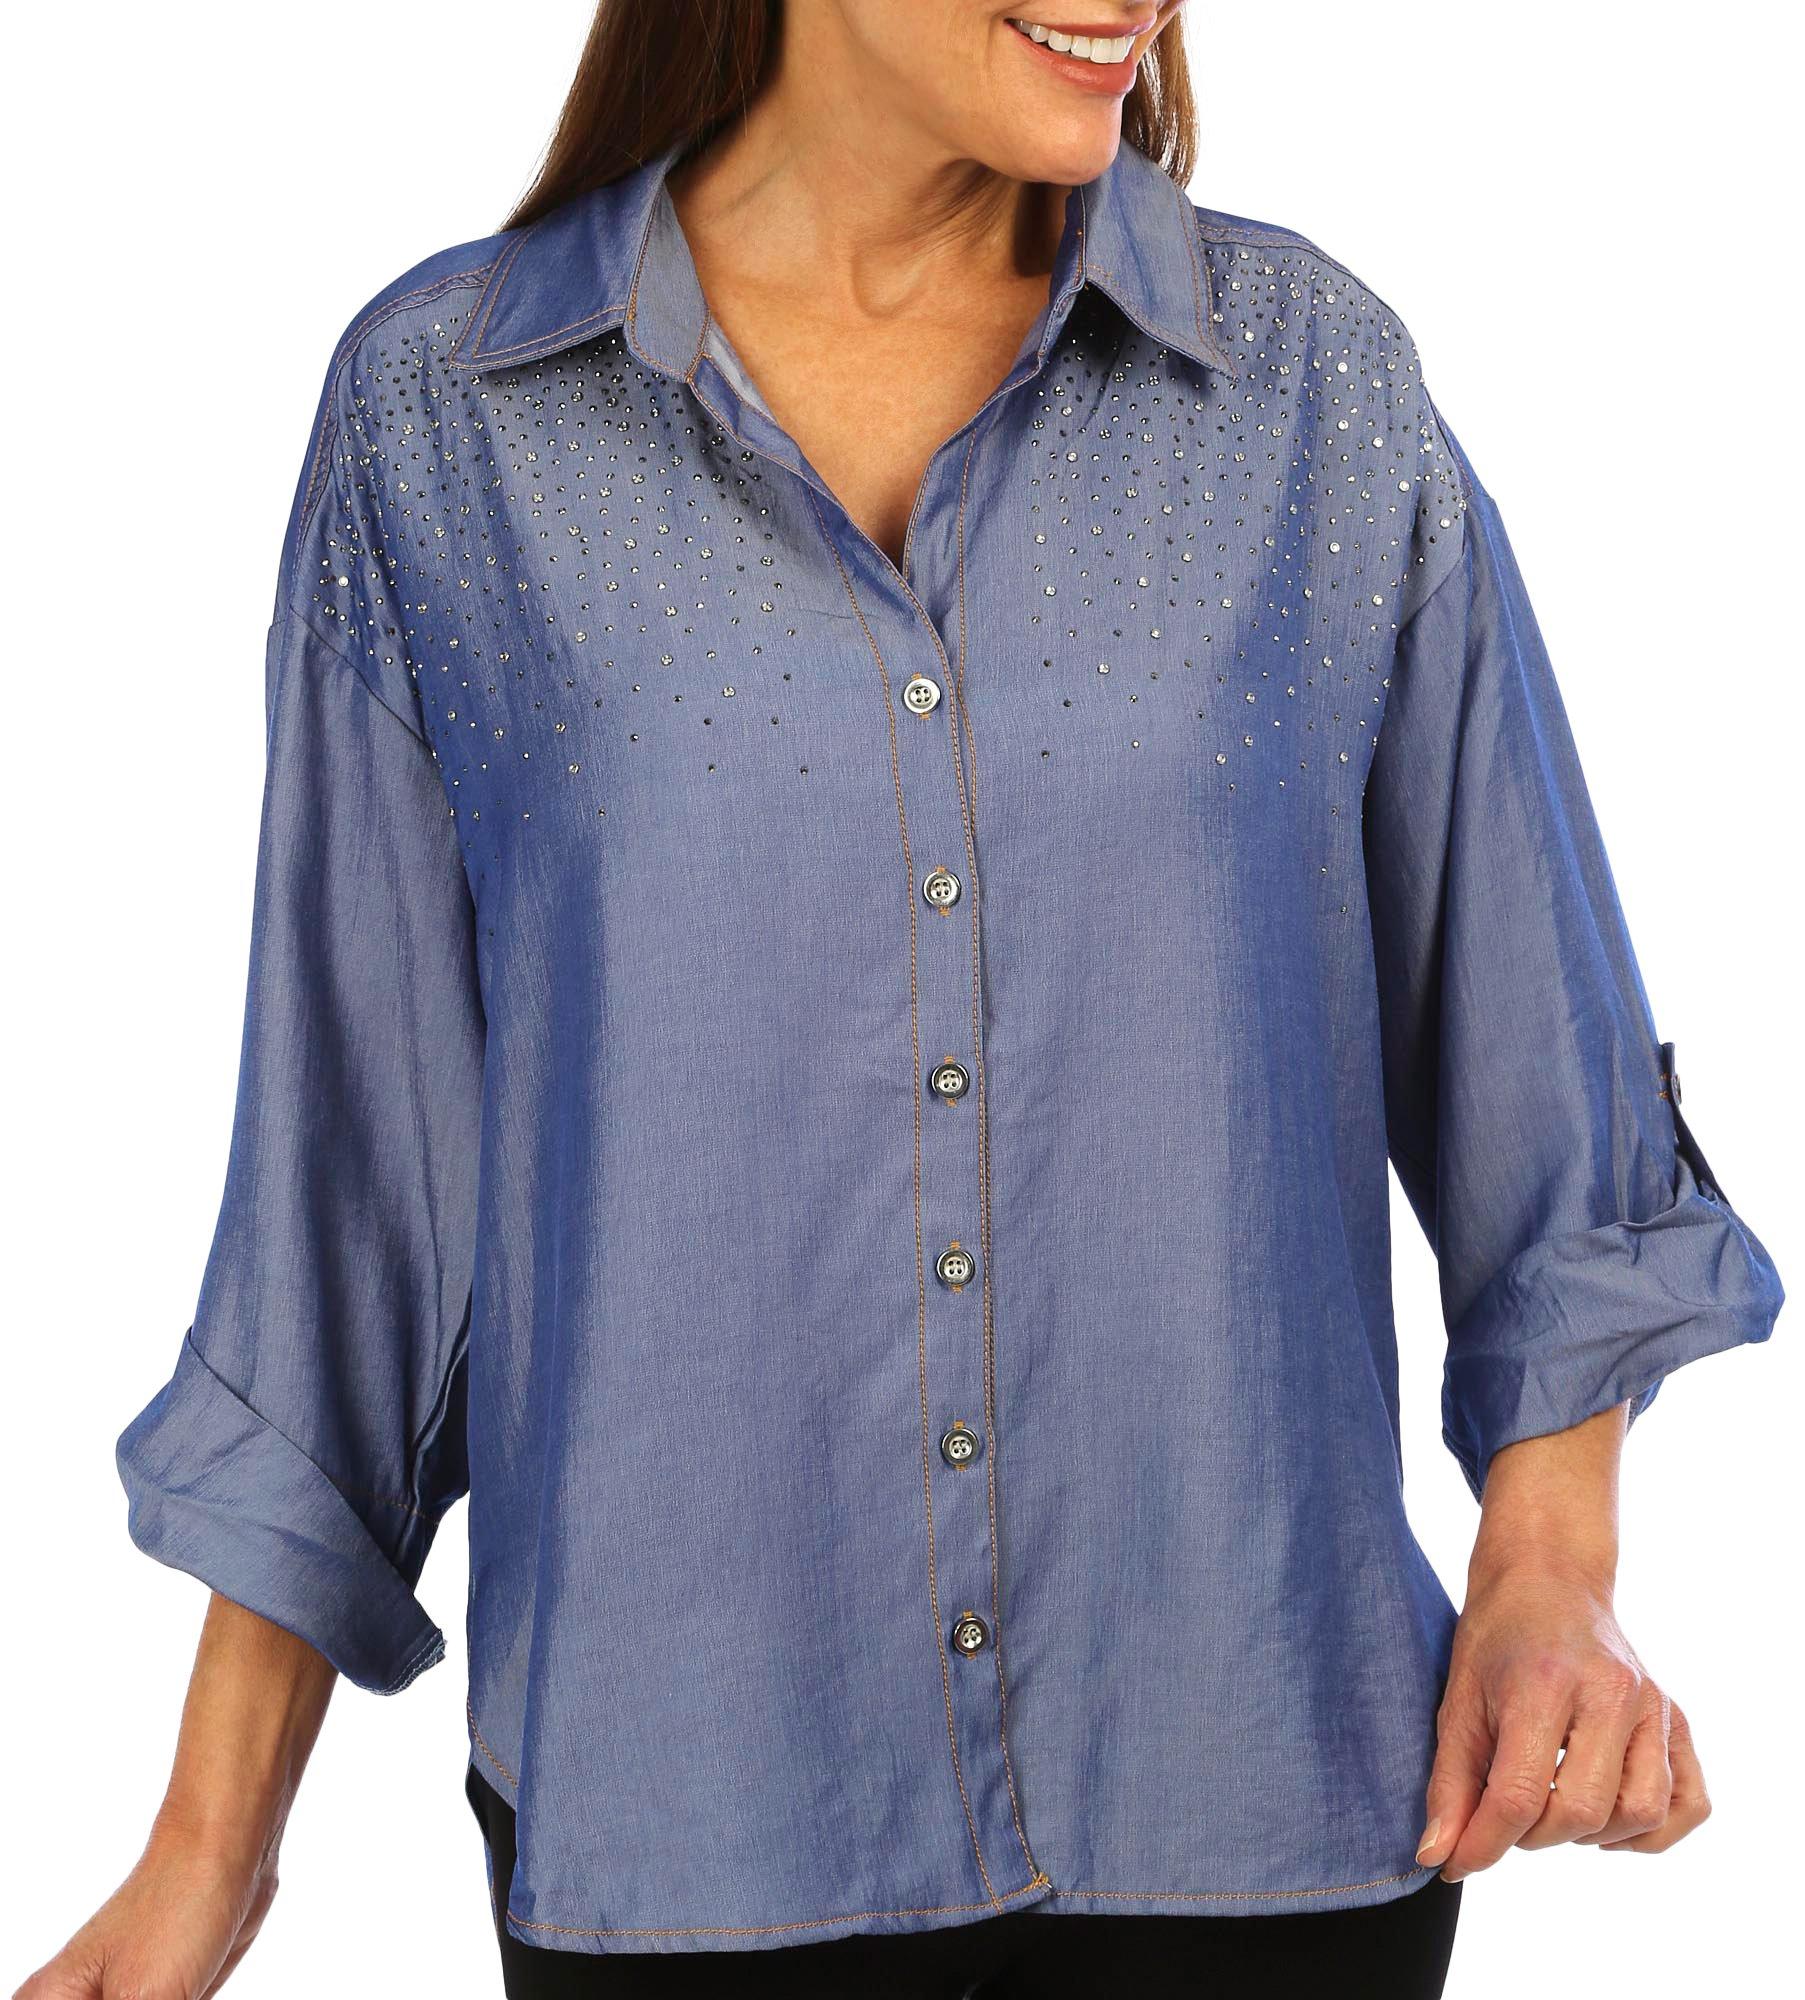 Women's Embellished Chambray Top